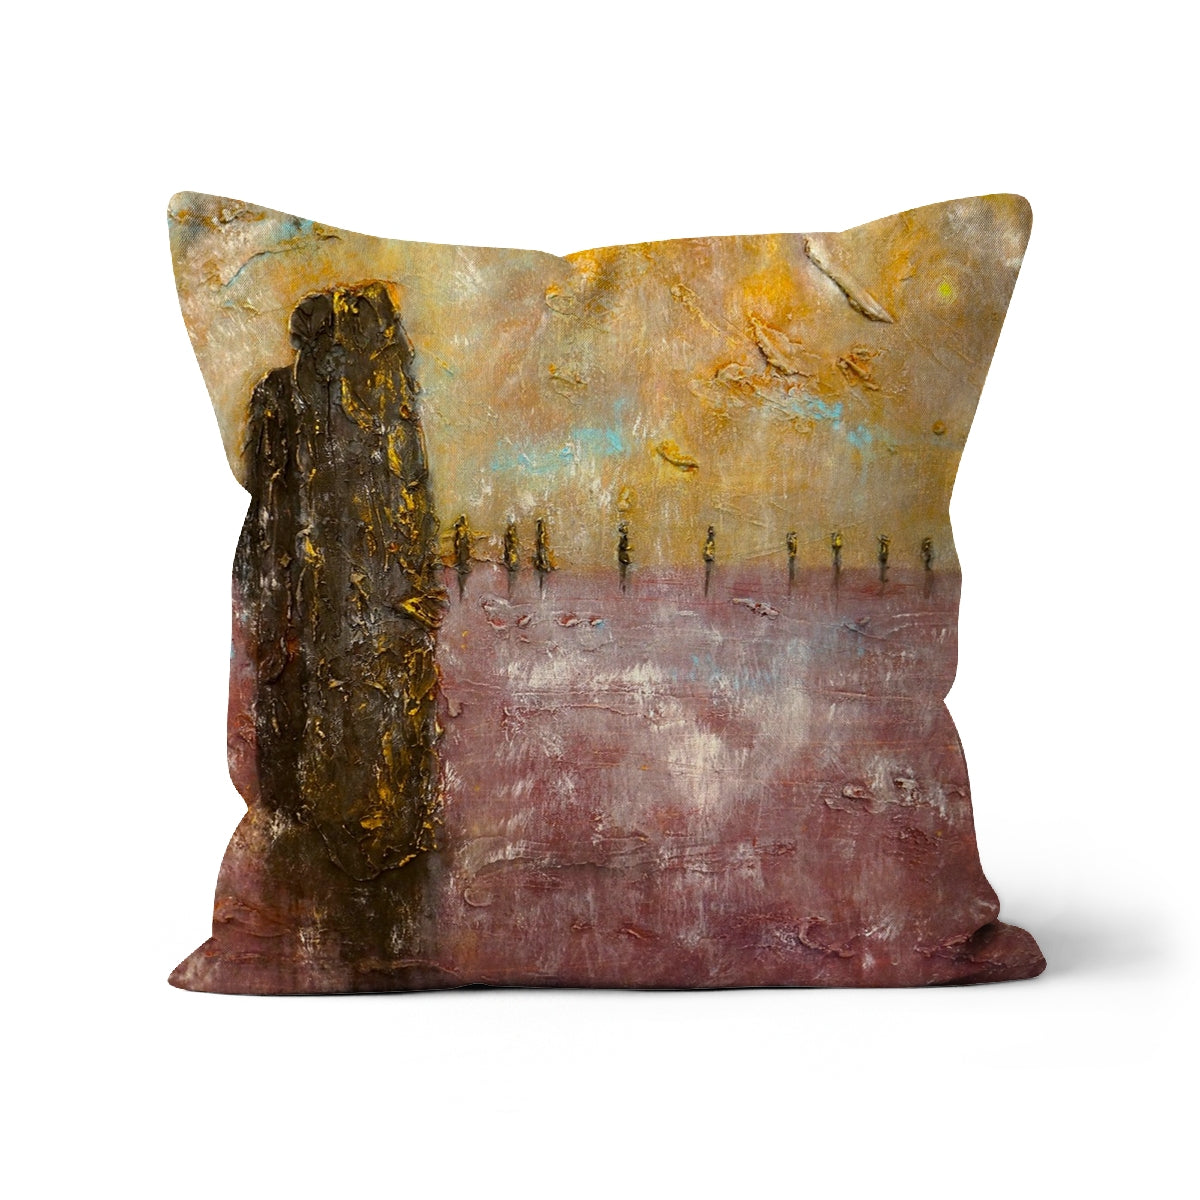 Brodgar Mist Orkney Art Gifts Cushion-Cushions-Orkney Art Gallery-Linen-22"x22"-Paintings, Prints, Homeware, Art Gifts From Scotland By Scottish Artist Kevin Hunter